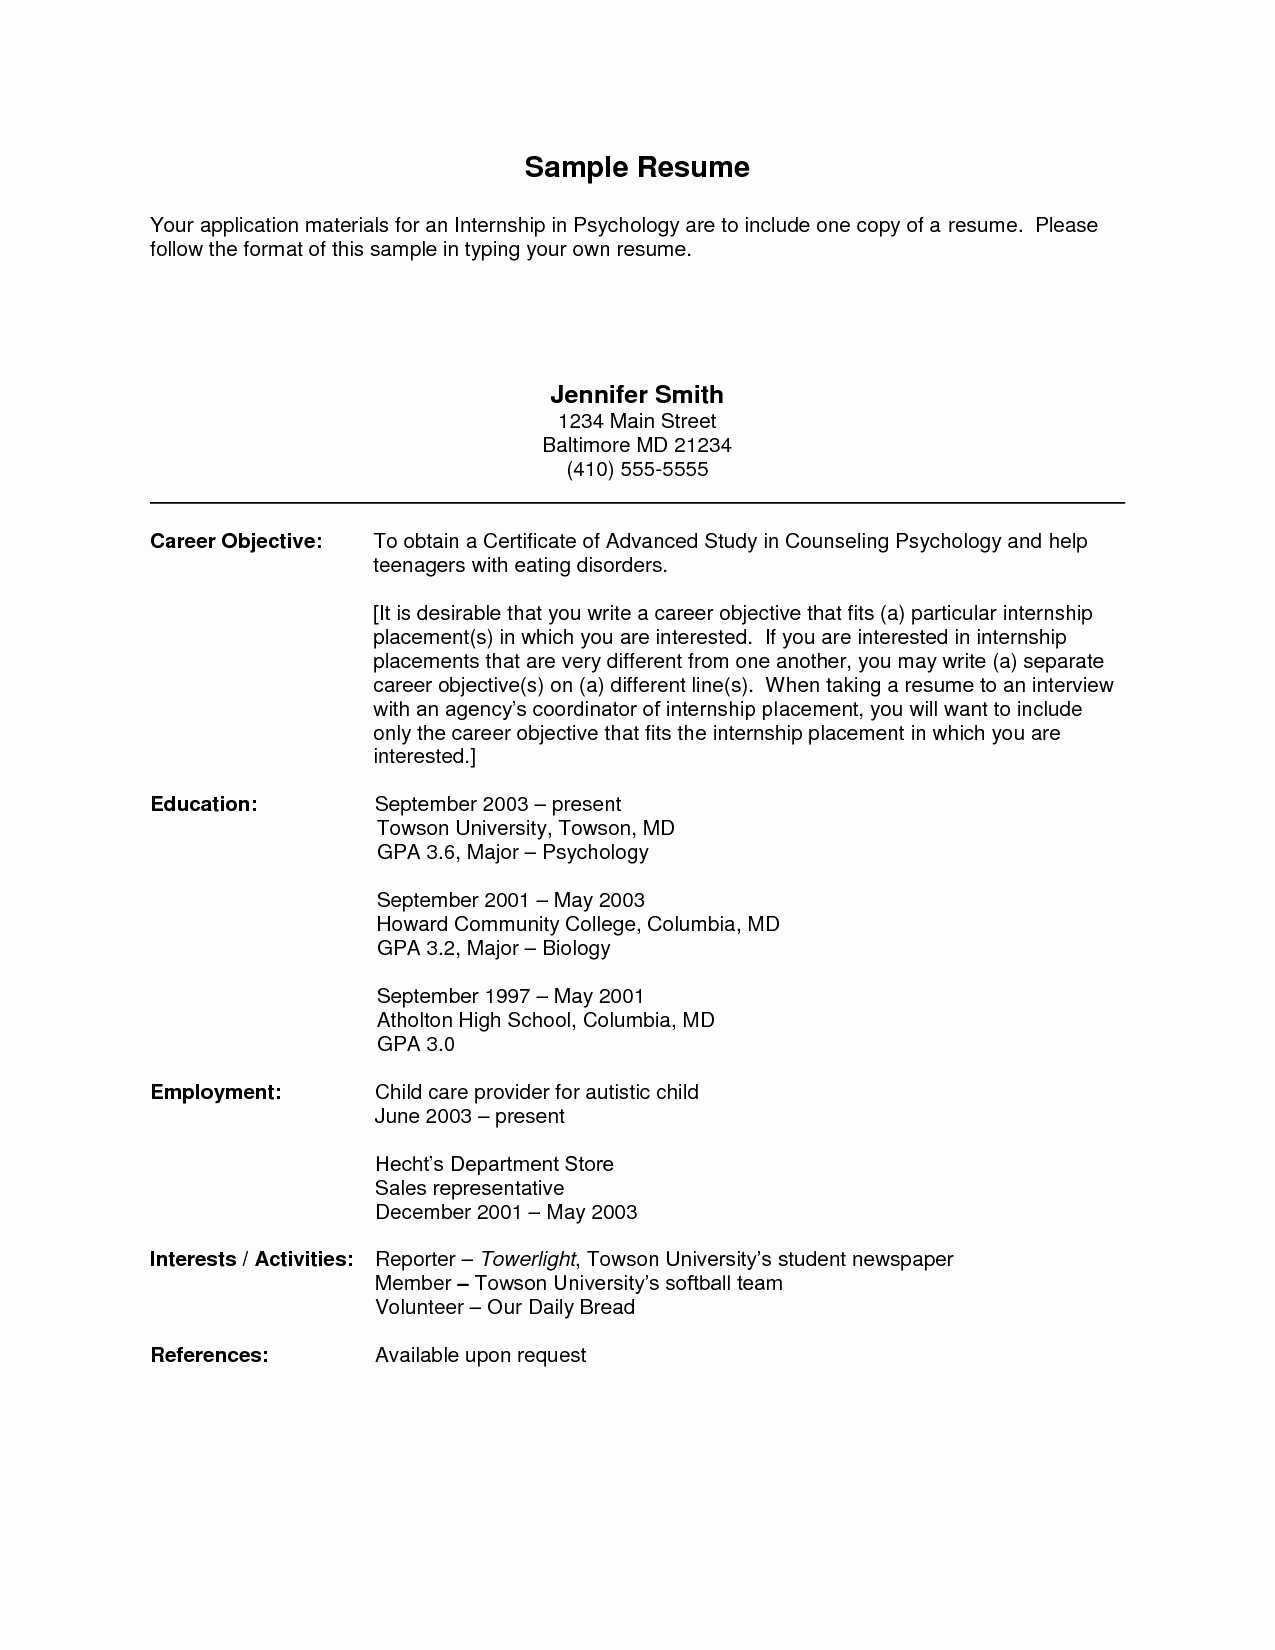 Resume Objective Examples for Teenagers Sample Objective